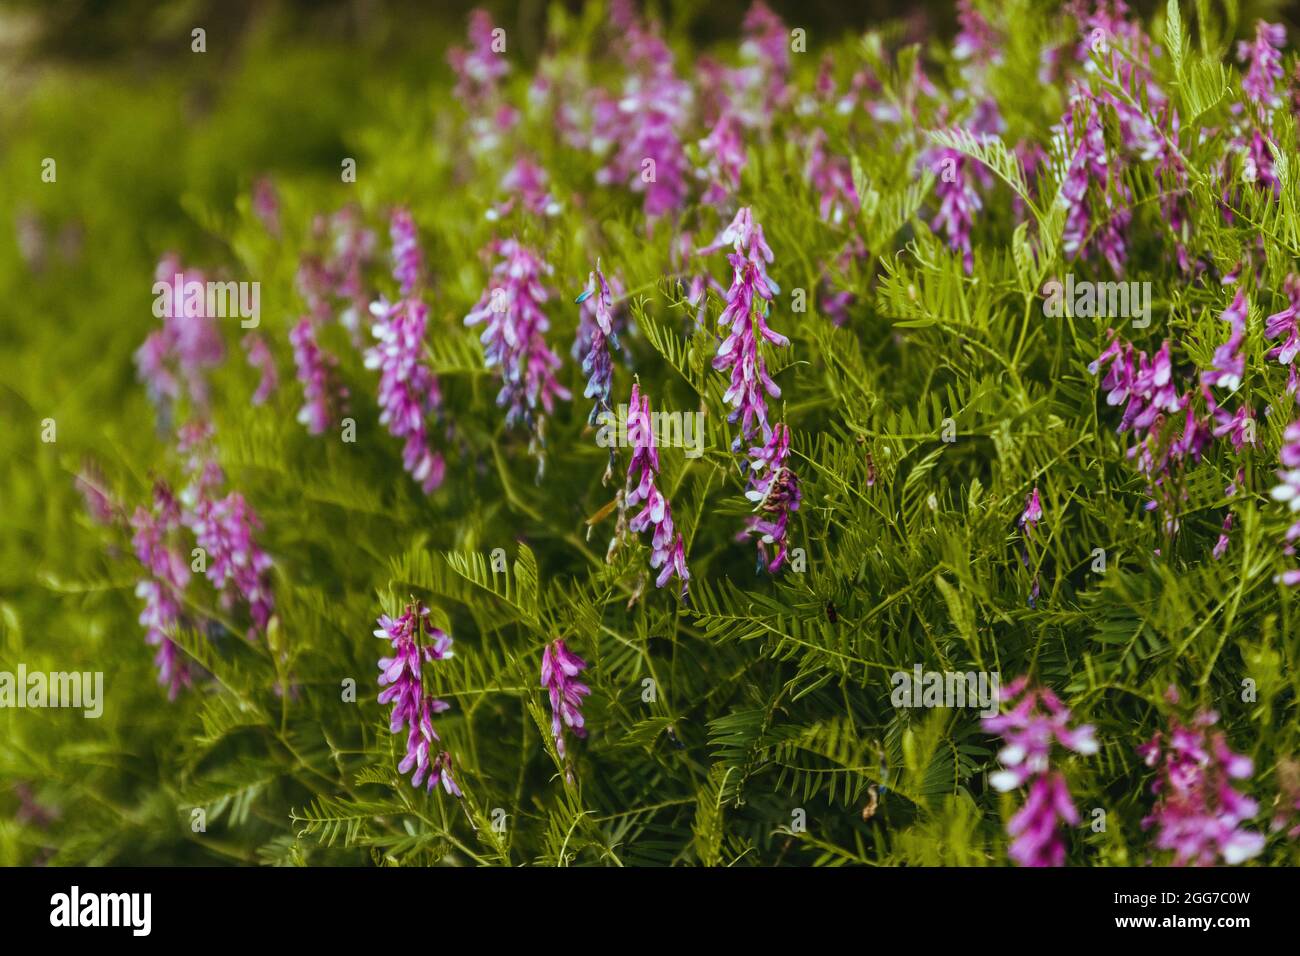 Closeup shot of marsh pea or Lathyrus palustris with blurred background Stock Photo